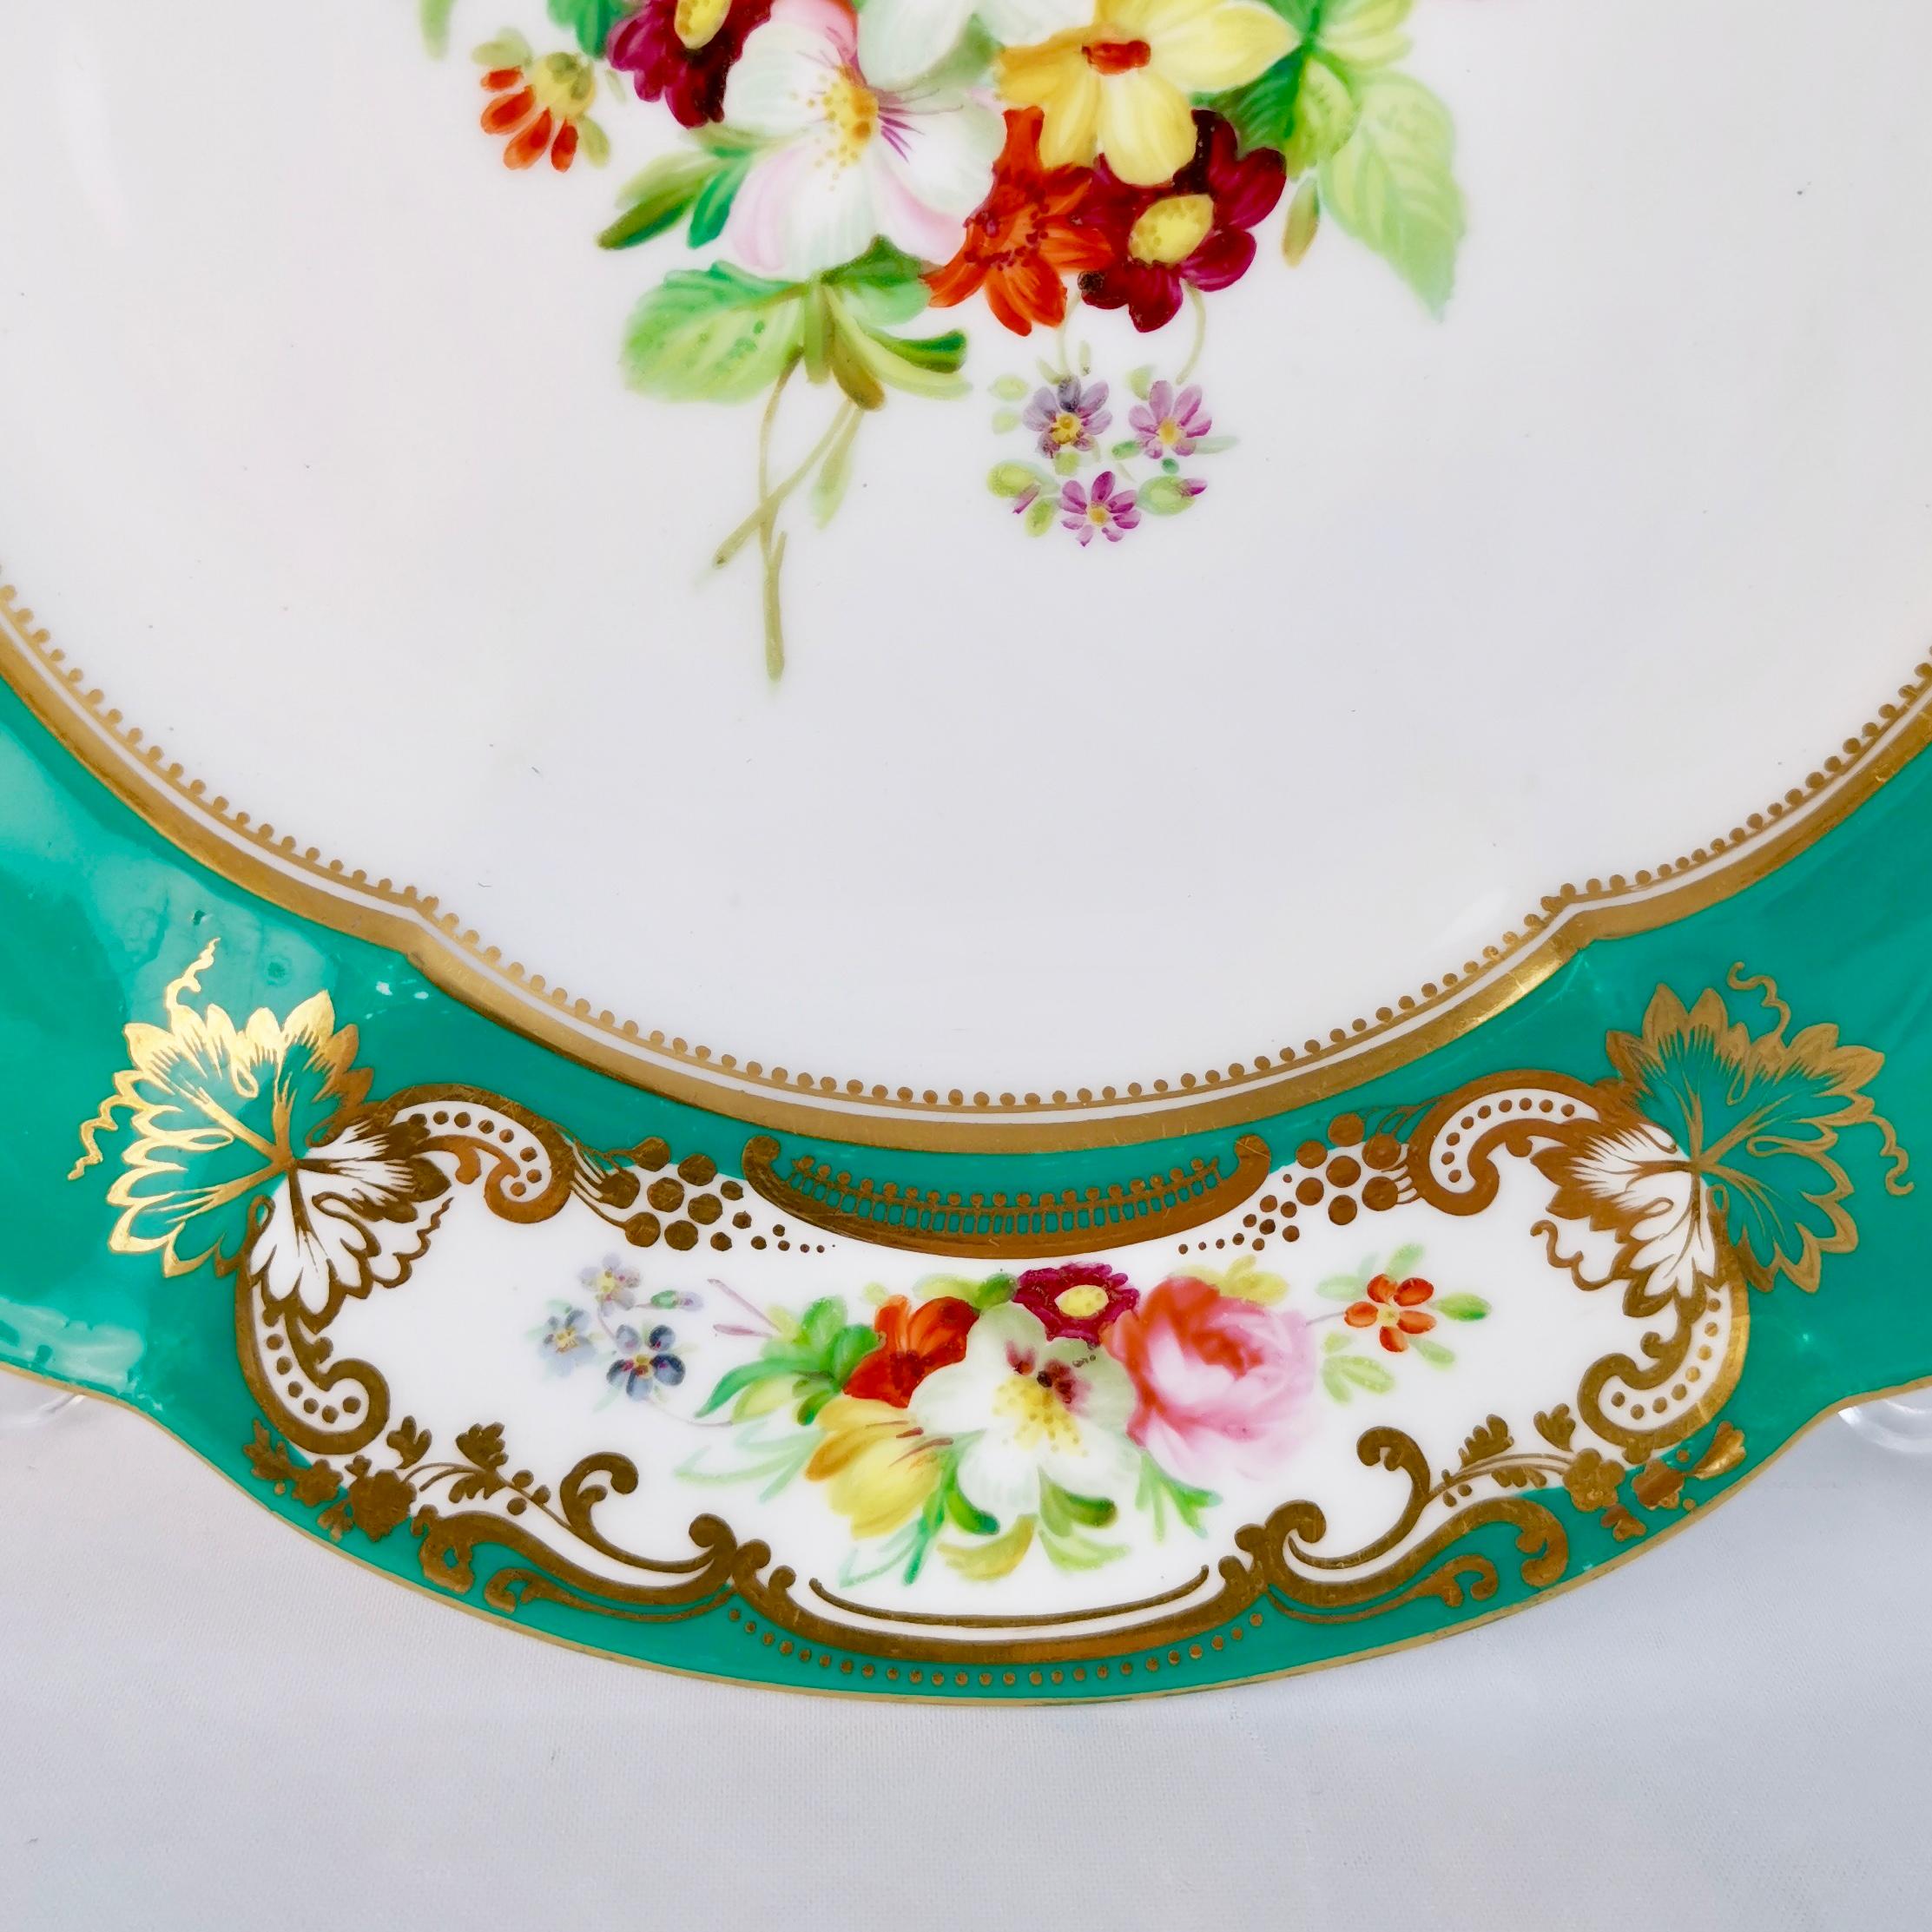 Hand-Painted Coalport Dessert Plate, 6-Lobed Teal with Hand Painted Flowers, circa 1860